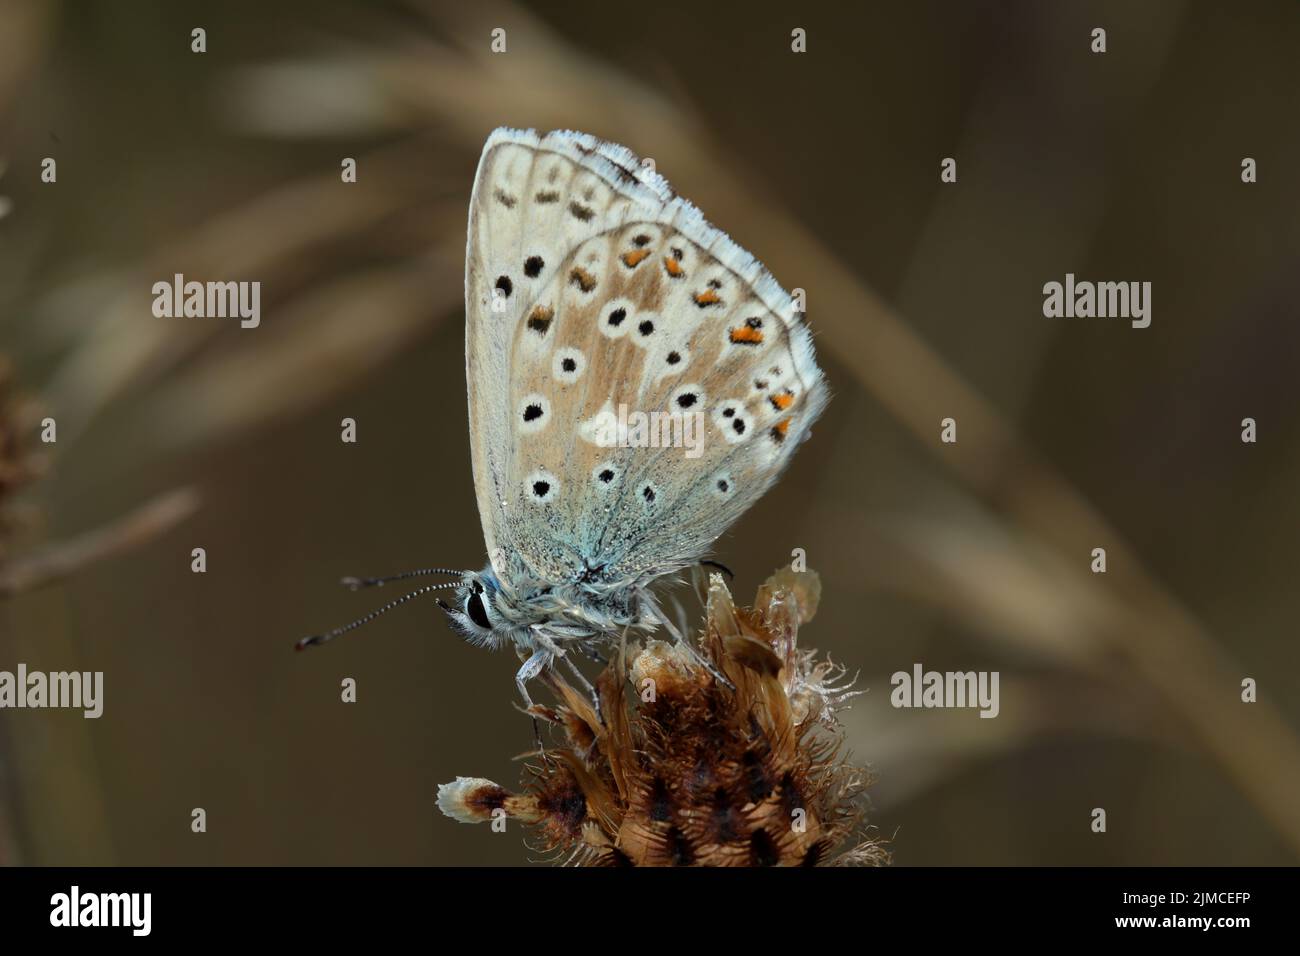 The chalkhill blue is a butterfly in the family Lycaenidae. It is a small butterfly that can be found throughout the Palearctic realm, where it occurs. Stock Photo